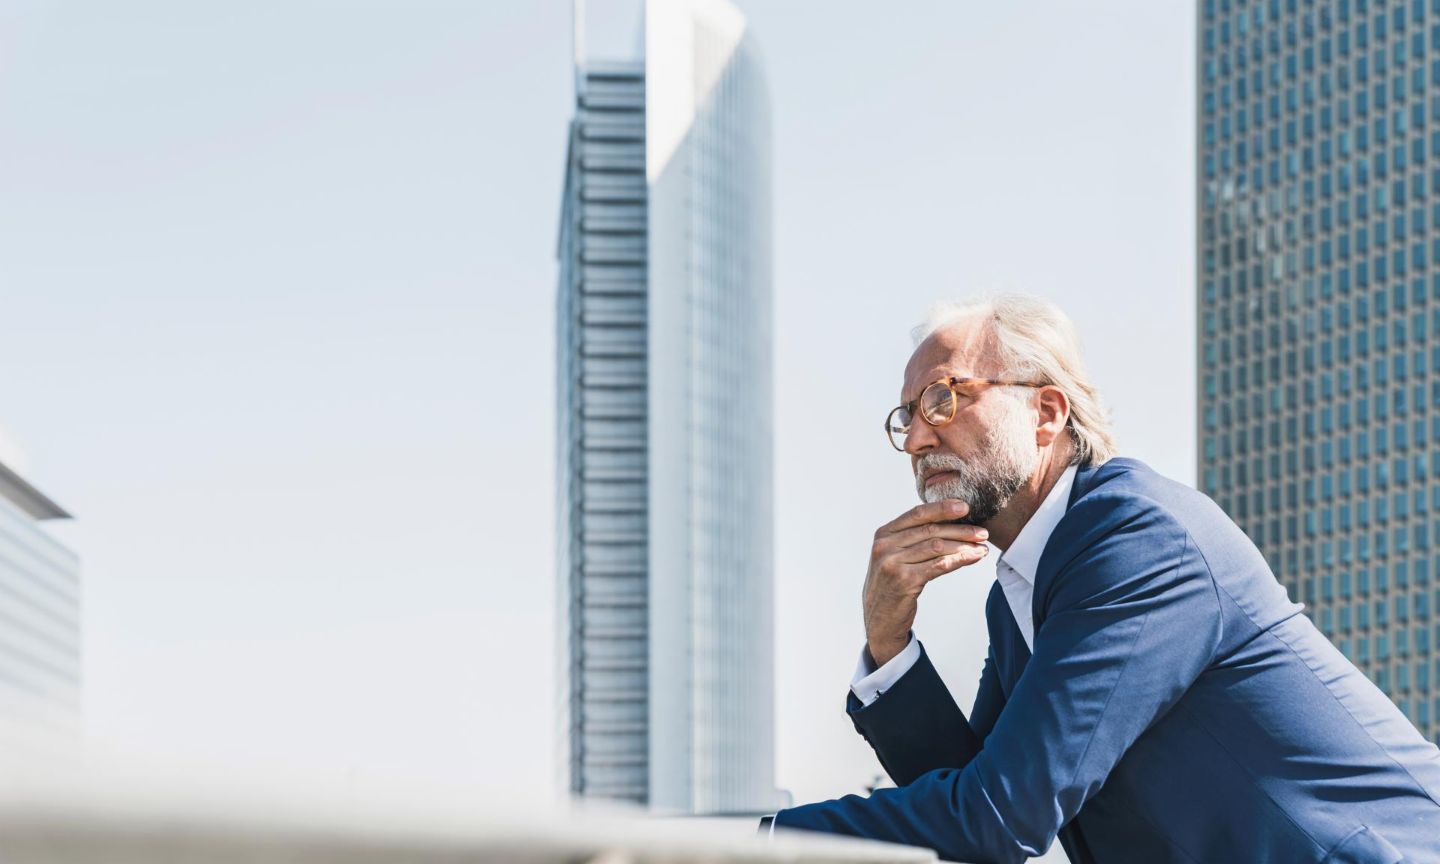 Man in suit leans against a parapet in front of office buildings and looks into the distance.